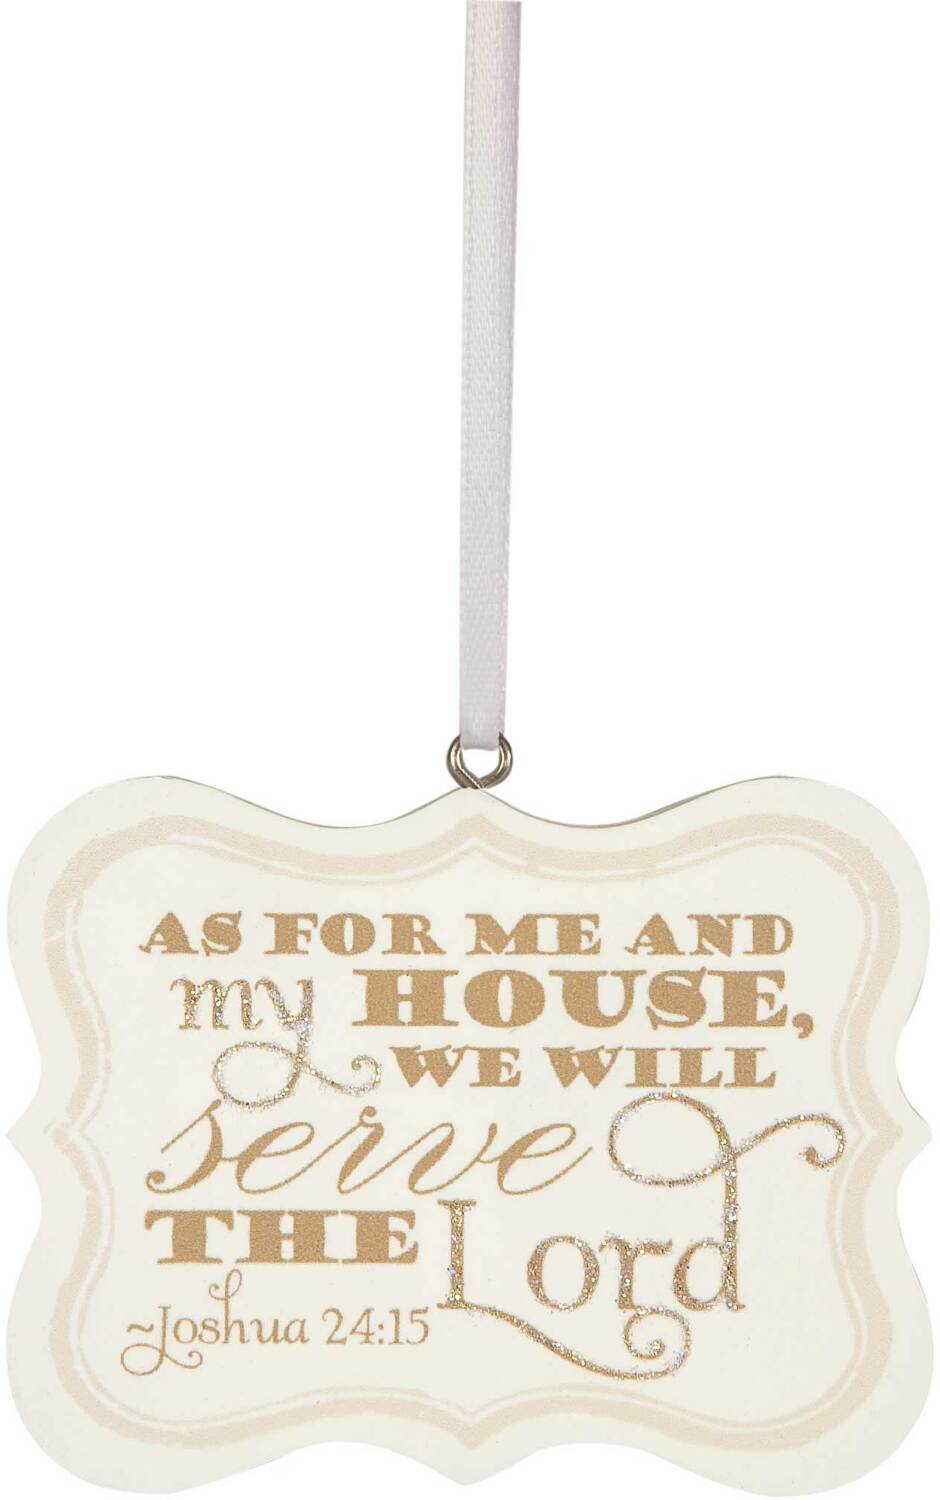 Serve the Lord by Signs of Happiness - Serve the Lord - 2.75" x 2.25" Hanging Plaque